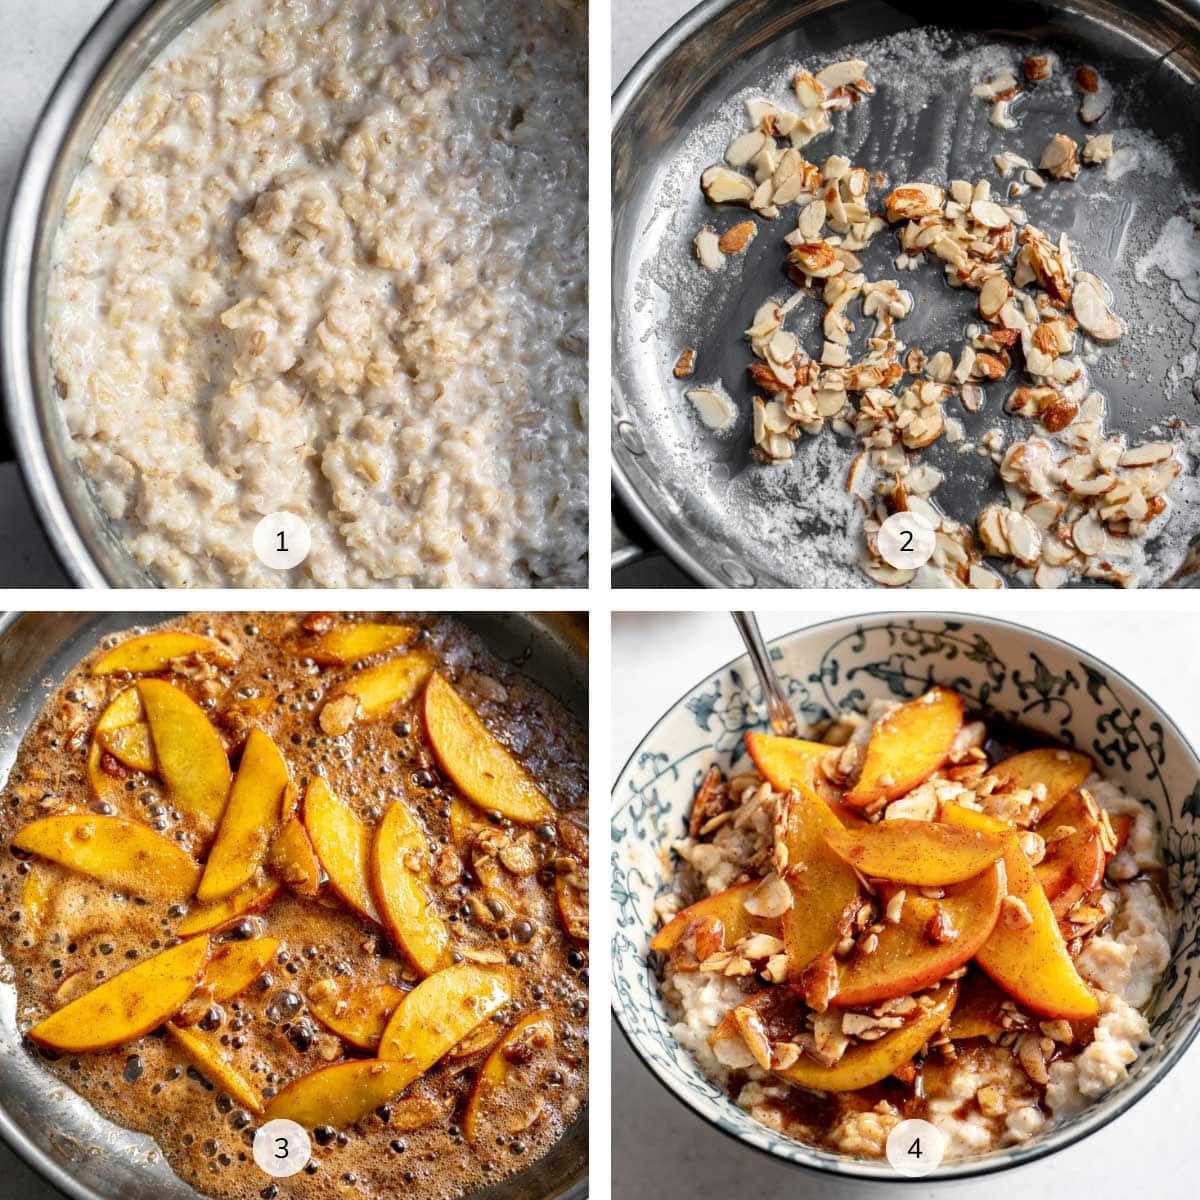 Four images showing how to make peach oatmeal labeled 1, 2, 3, 4